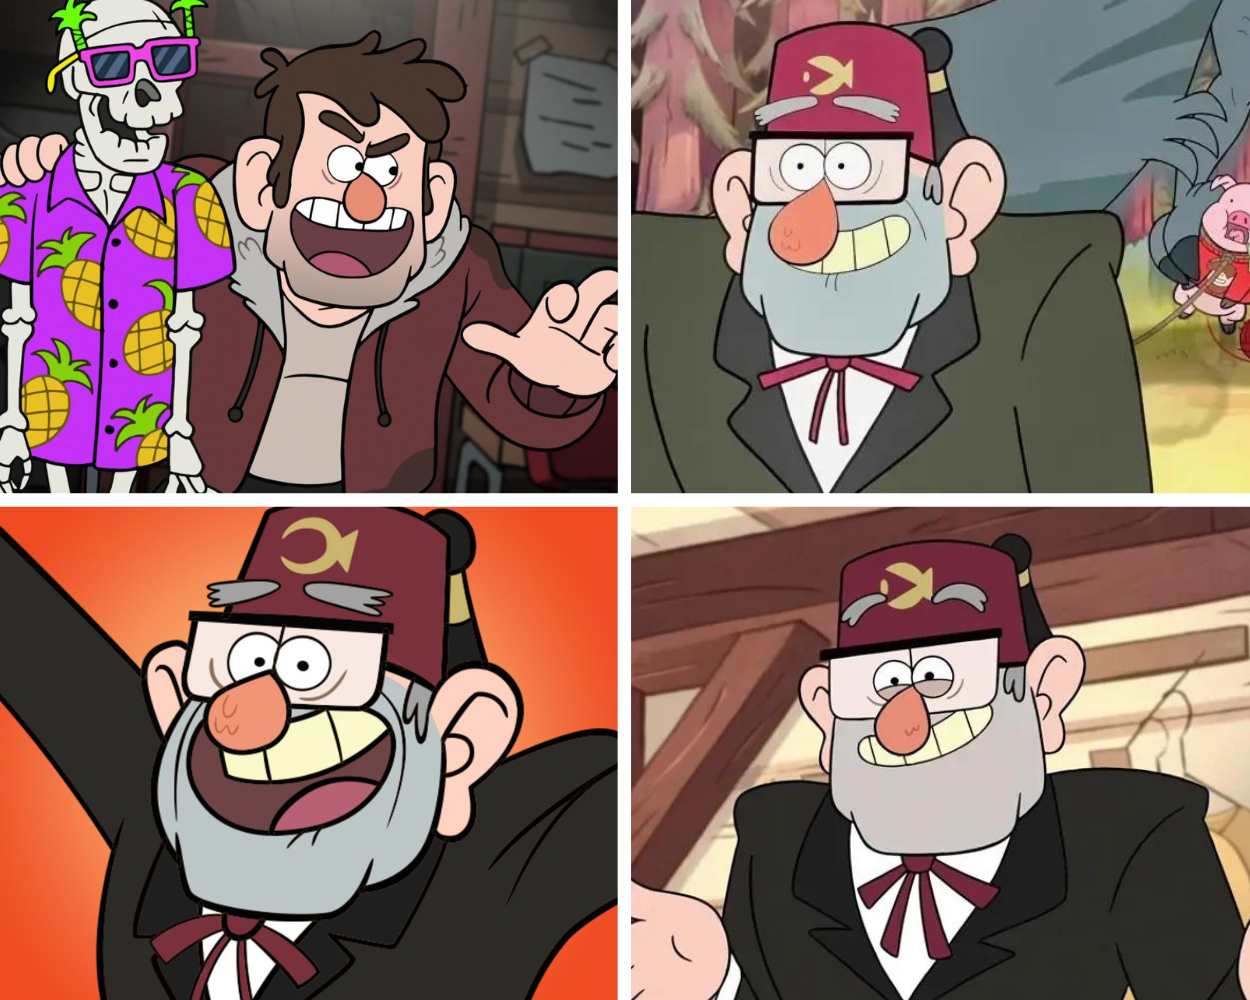 Stan from Gravity Falls